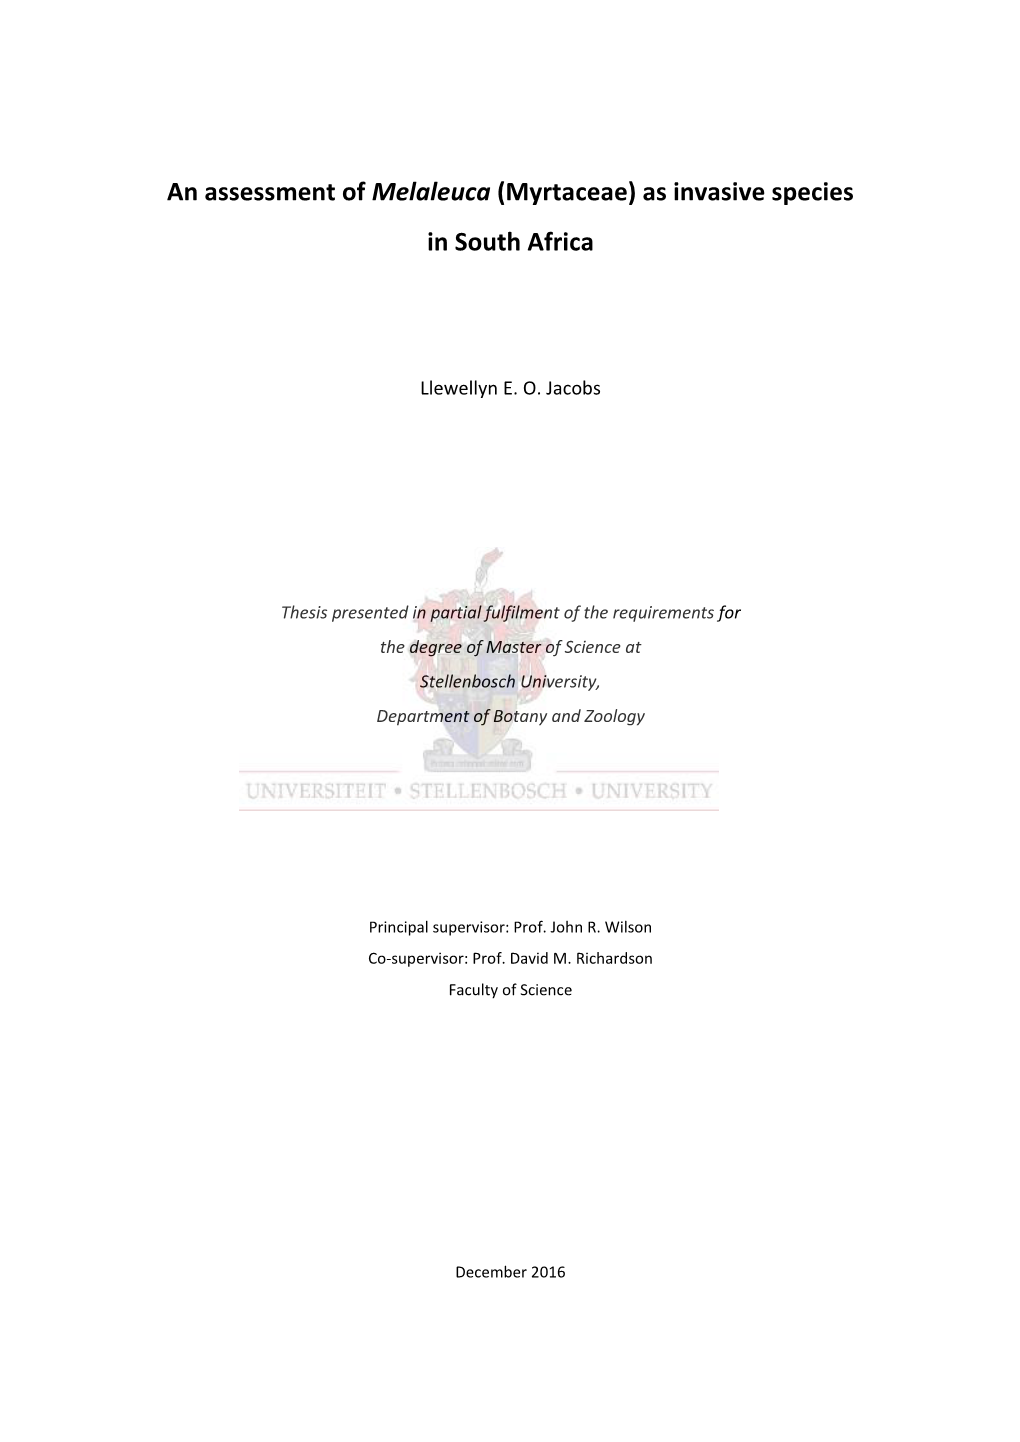 An Assessment of Melaleuca (Myrtaceae) As Invasive Species in South Africa